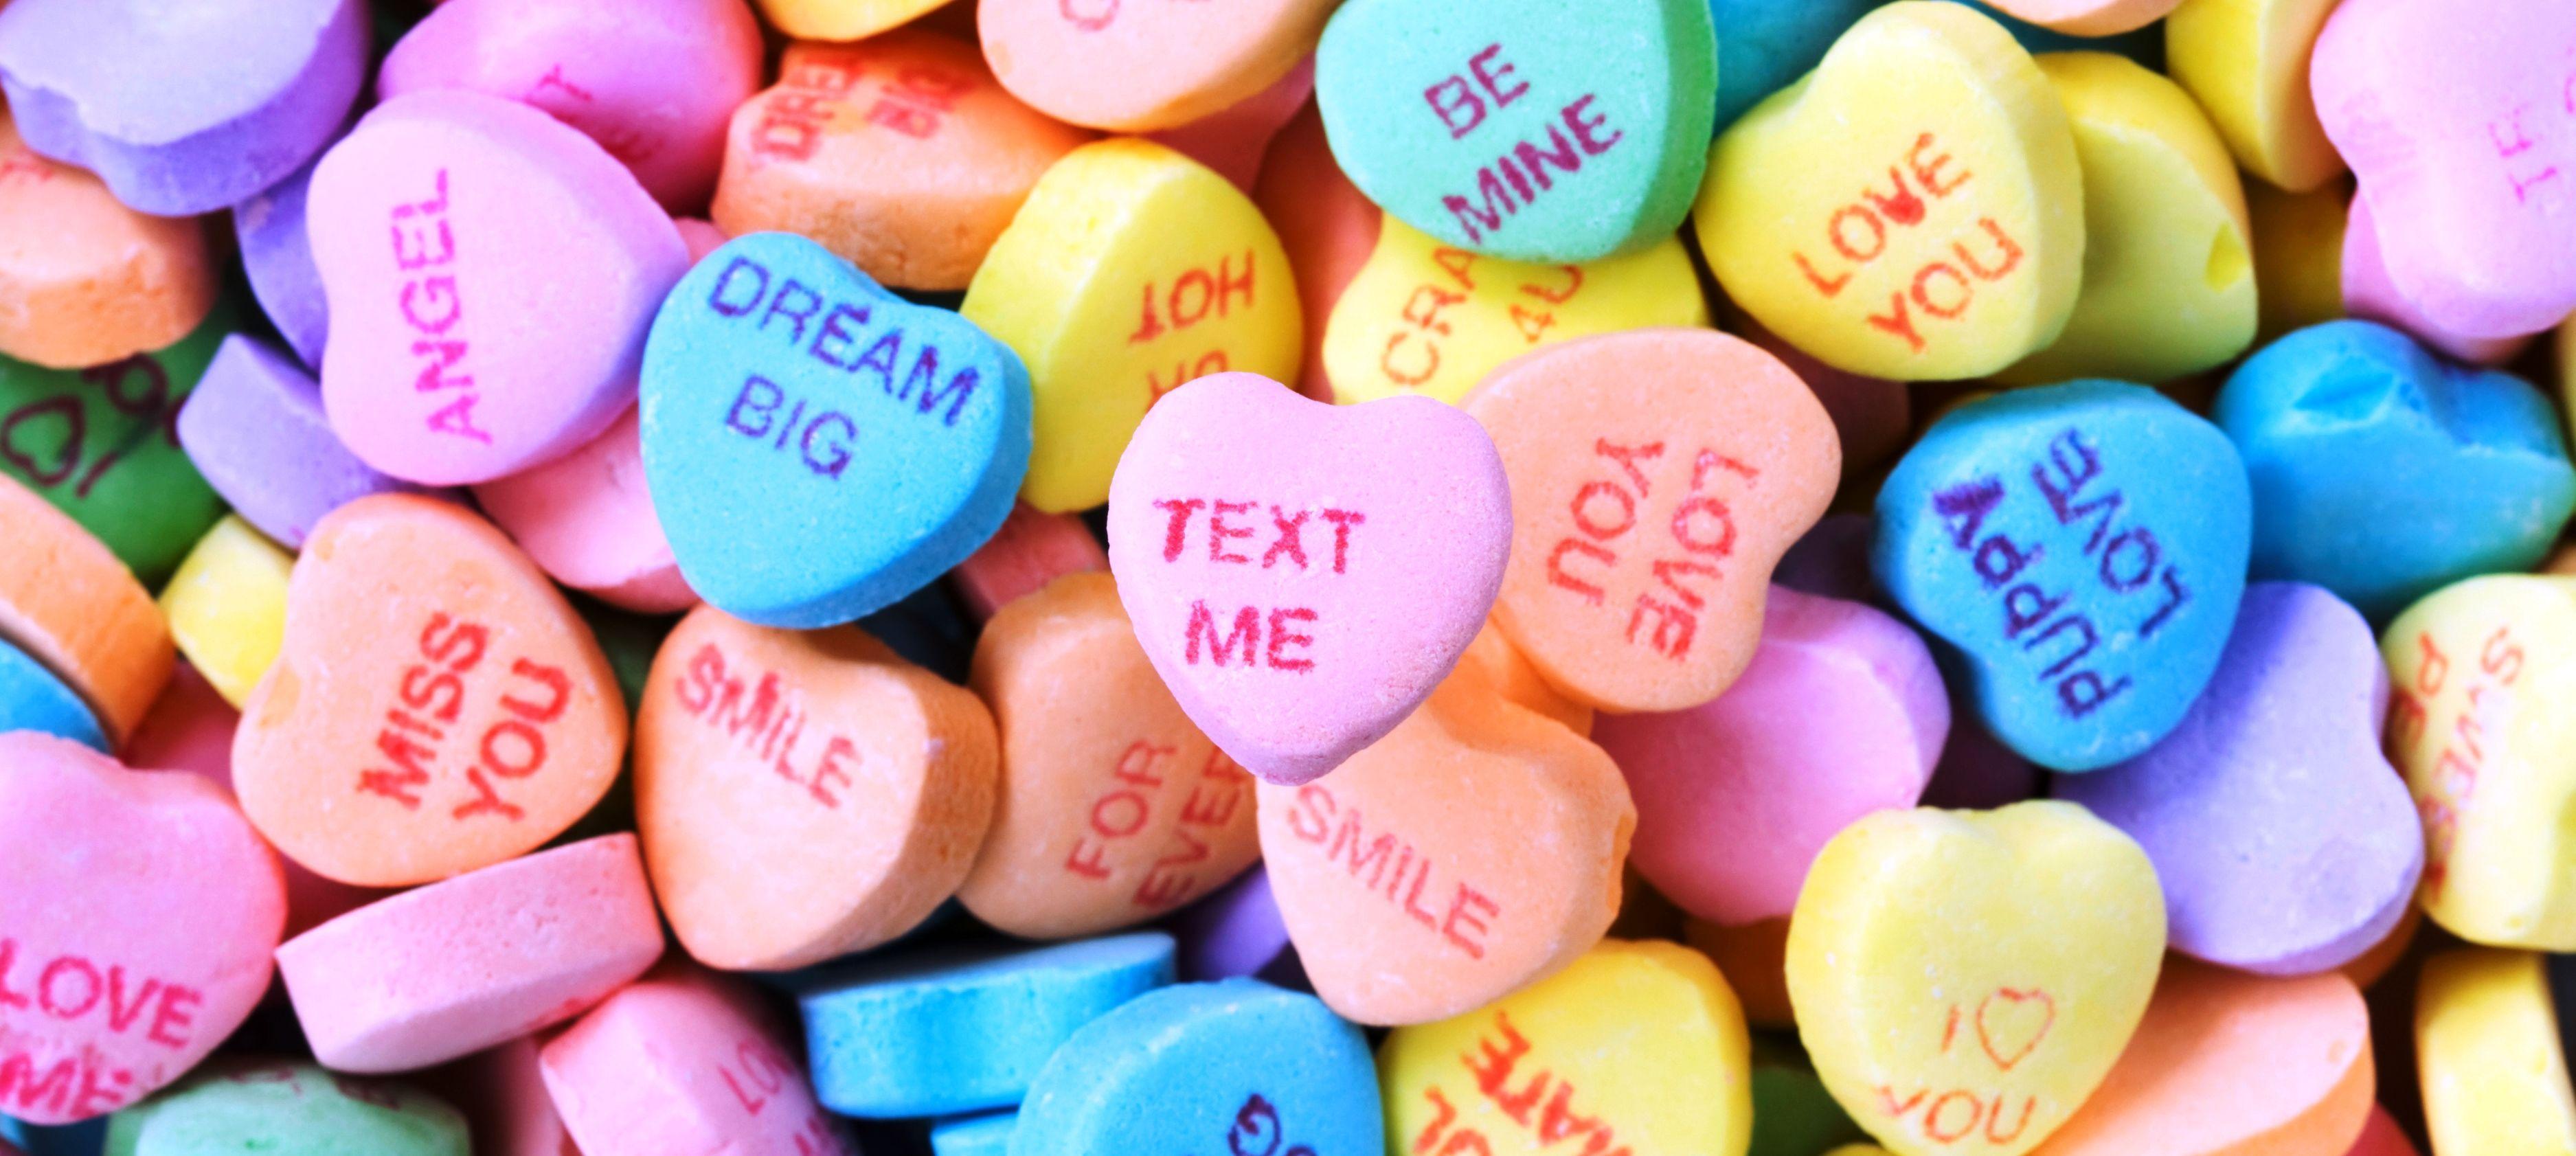 ProperPrintables  Conversation Hearts Wallpaper Download  Heart candy  Converse with heart Candy